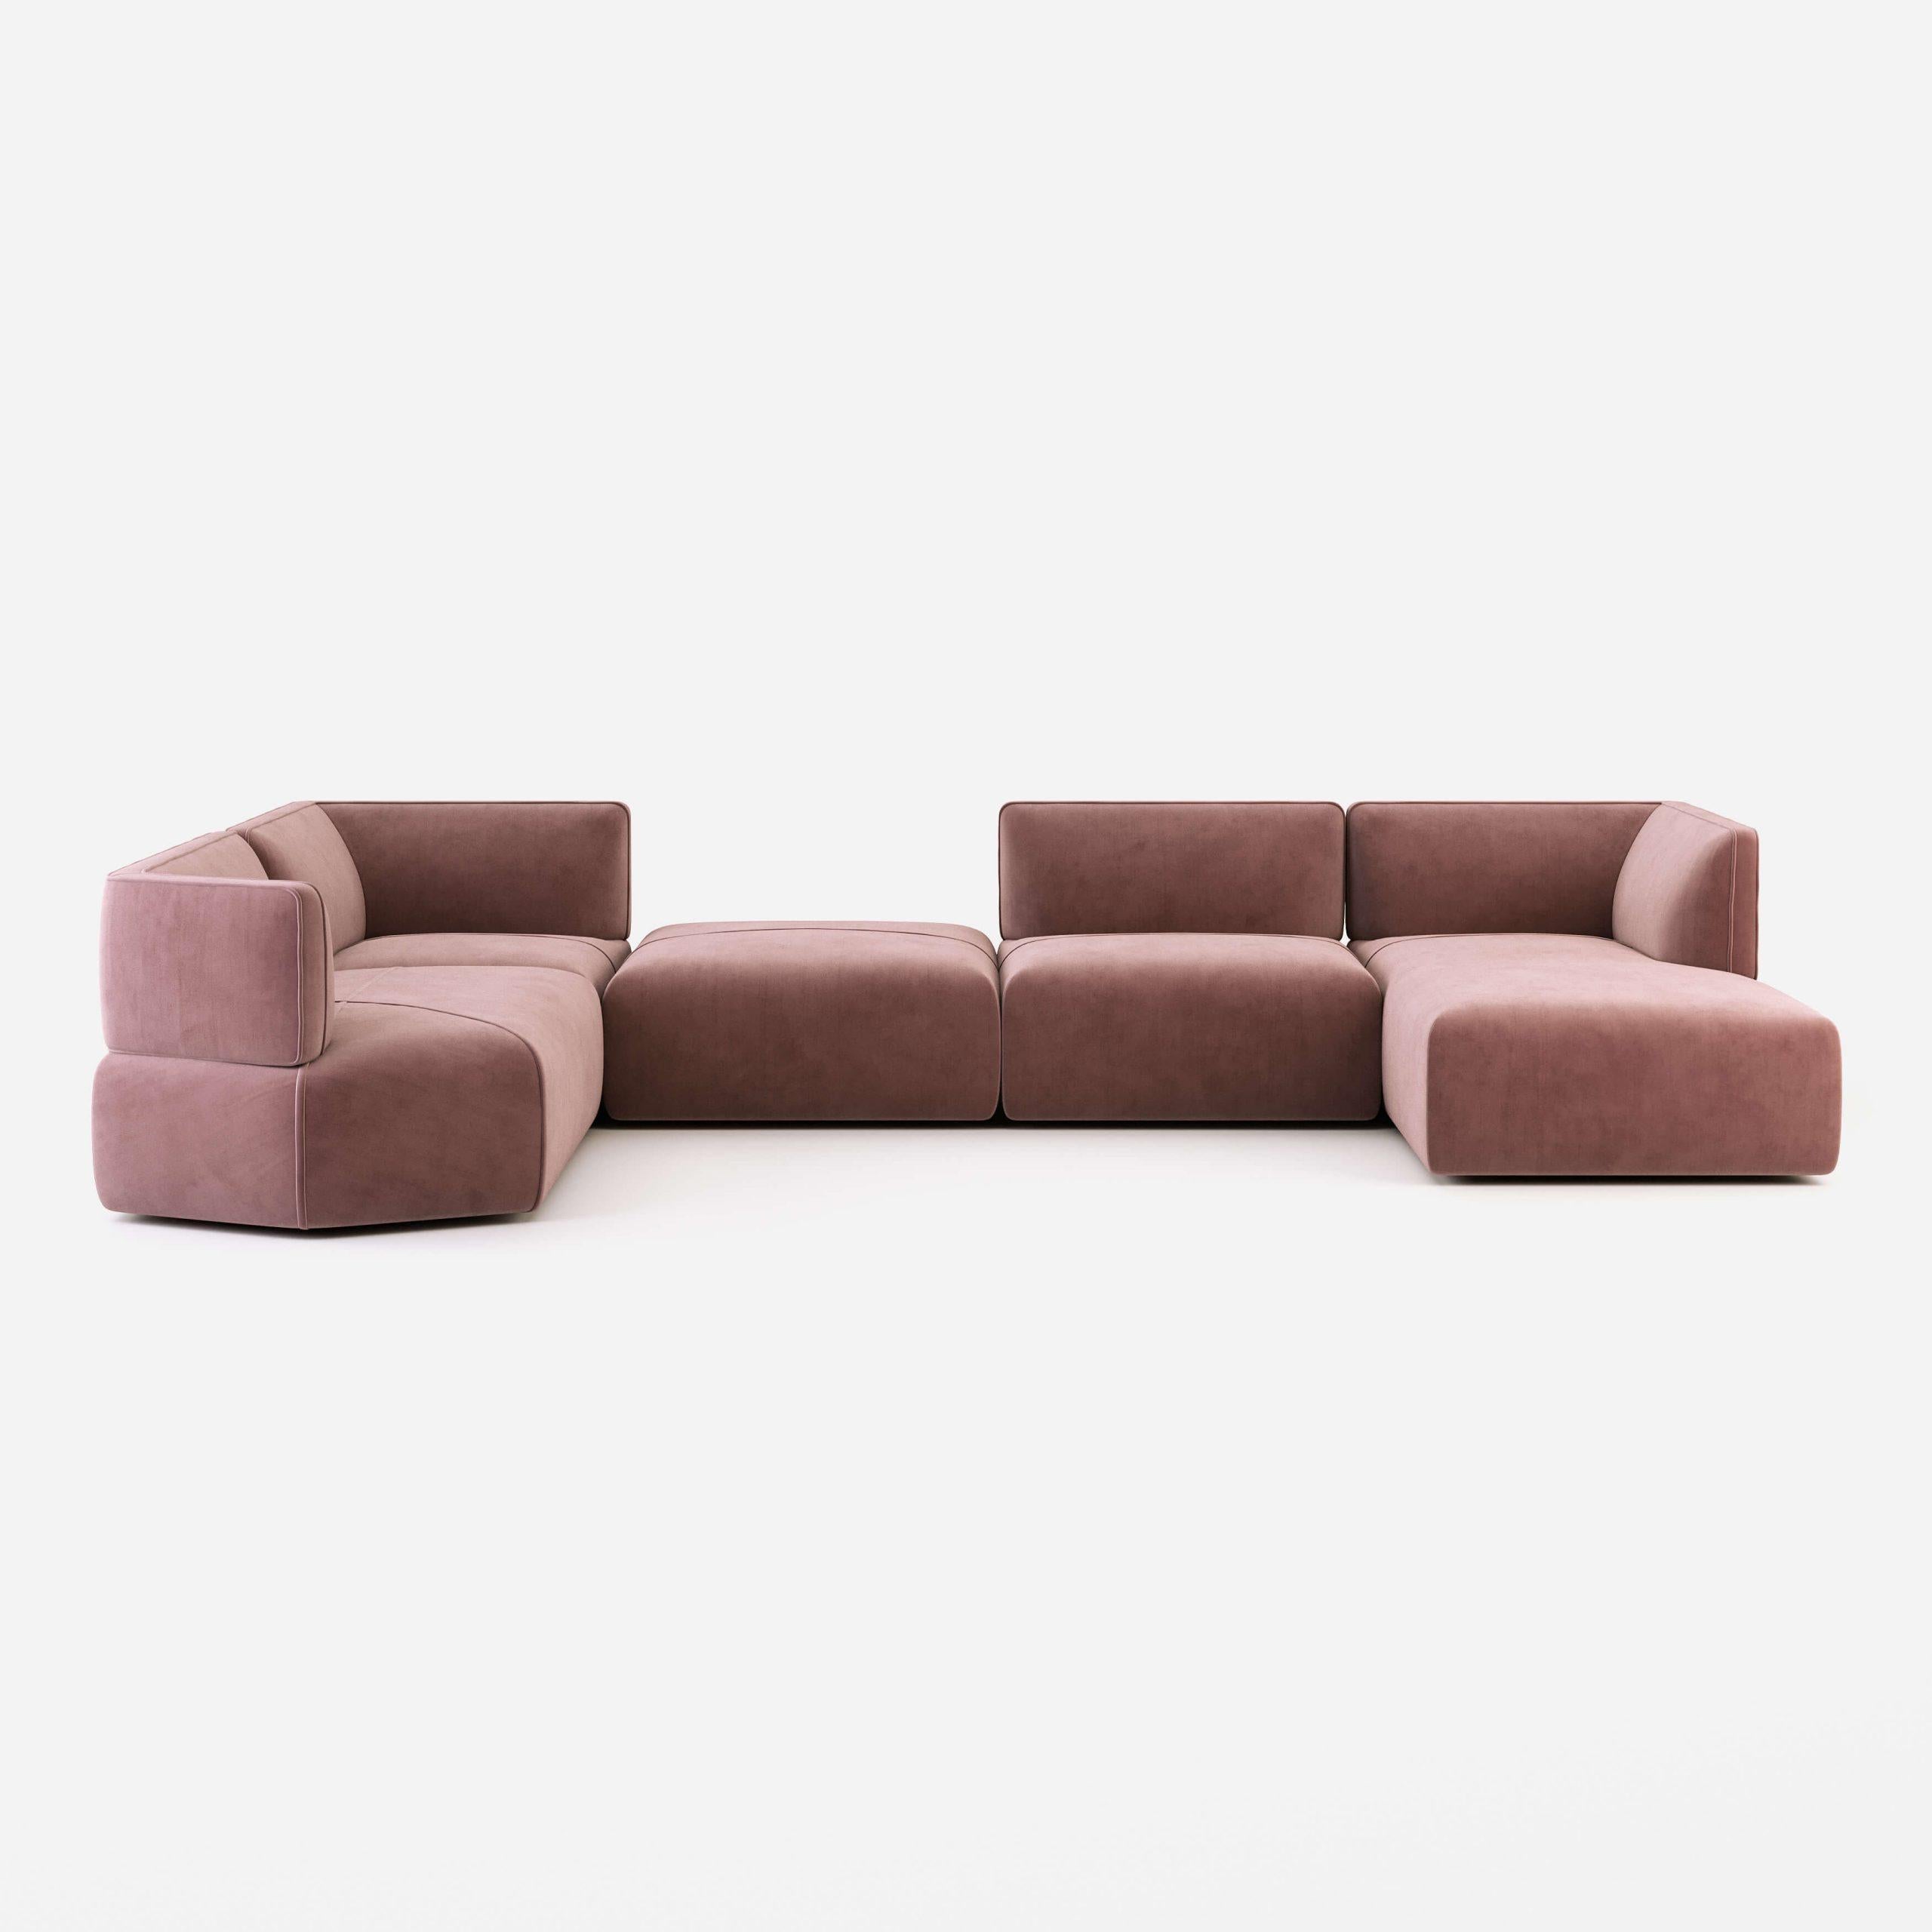 This is a modern comfort piece with all of the practical elements that a sectional seating arrangement provides. Shown in cotton velvet.